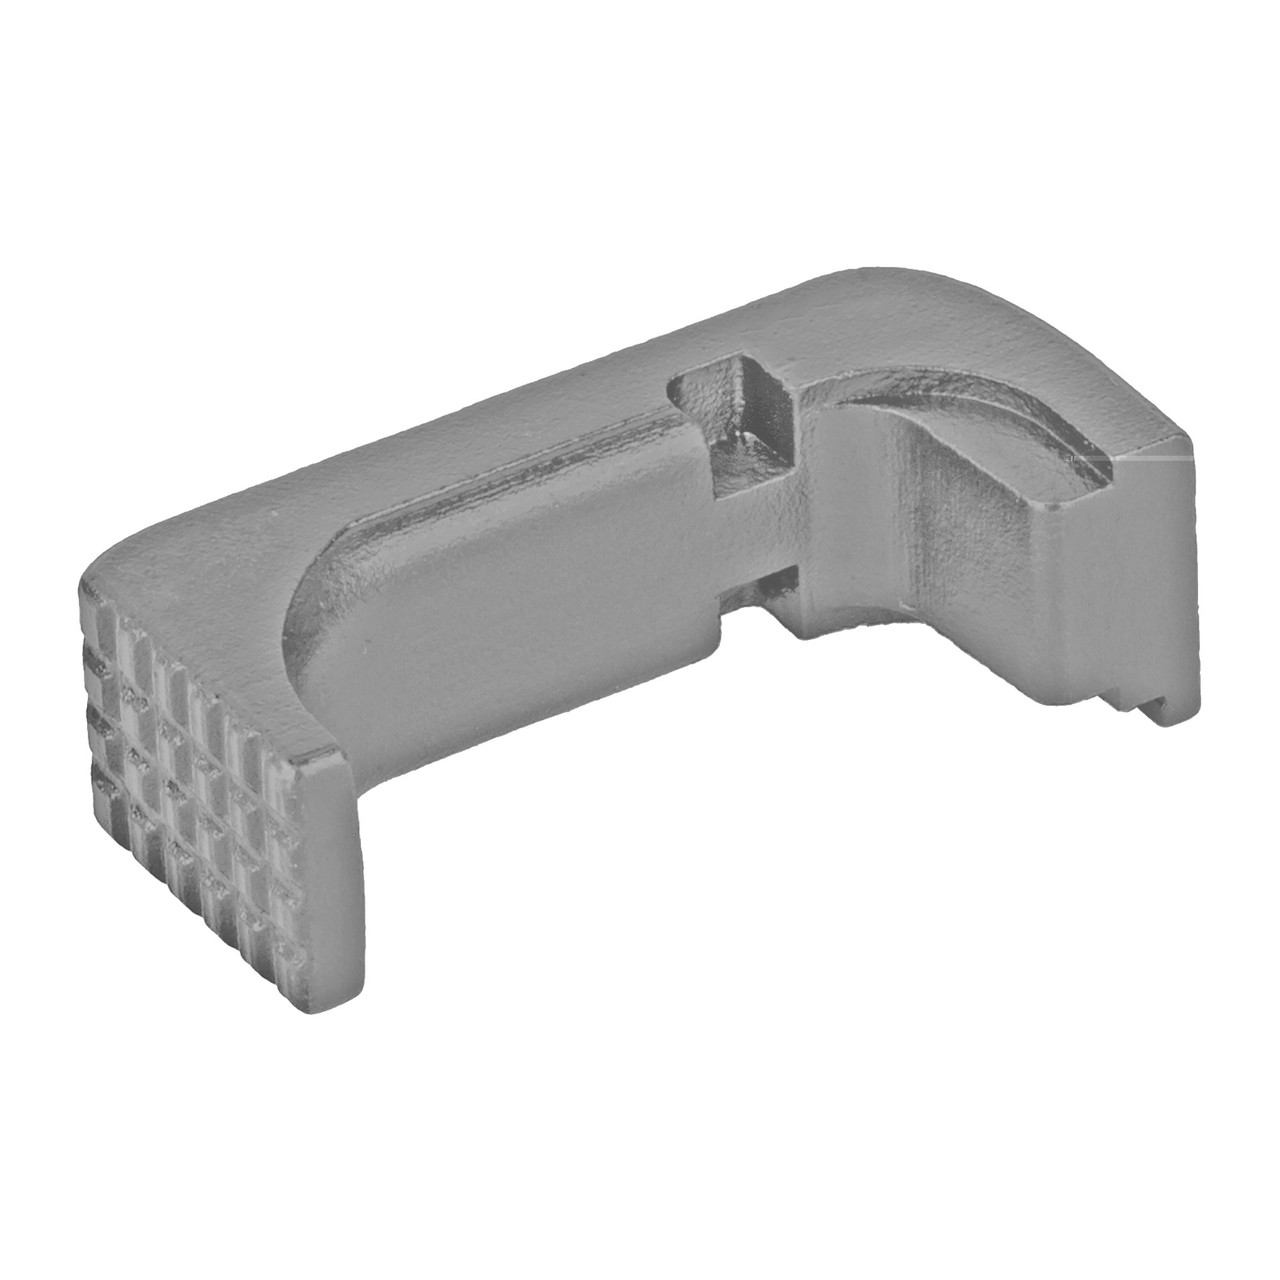 Shield Arms G43X-EMR-GREY Mag Catch For Glock 43x/48 Gray